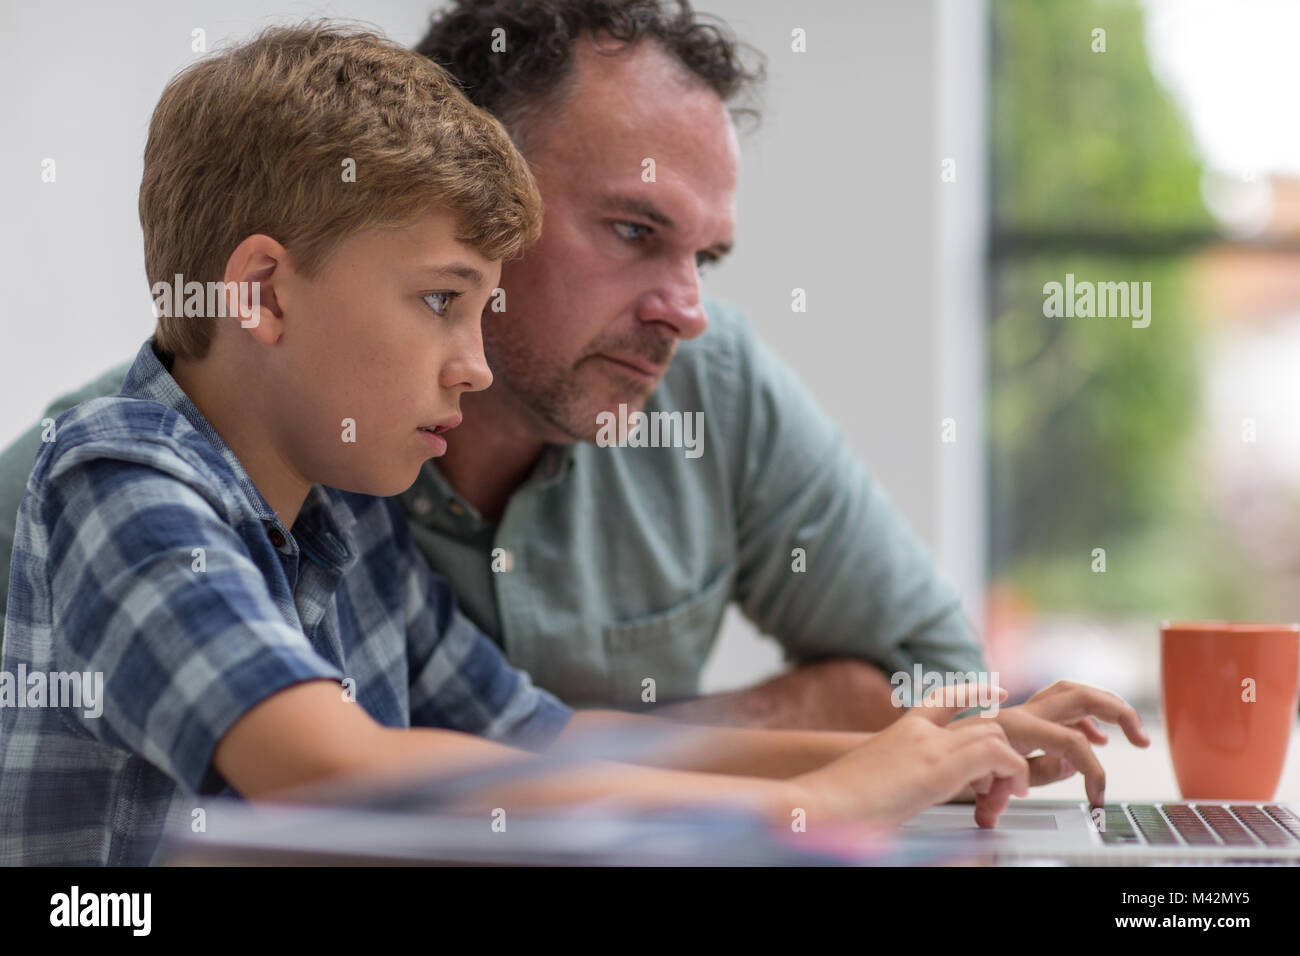 Father helping son with homework Stock Photo